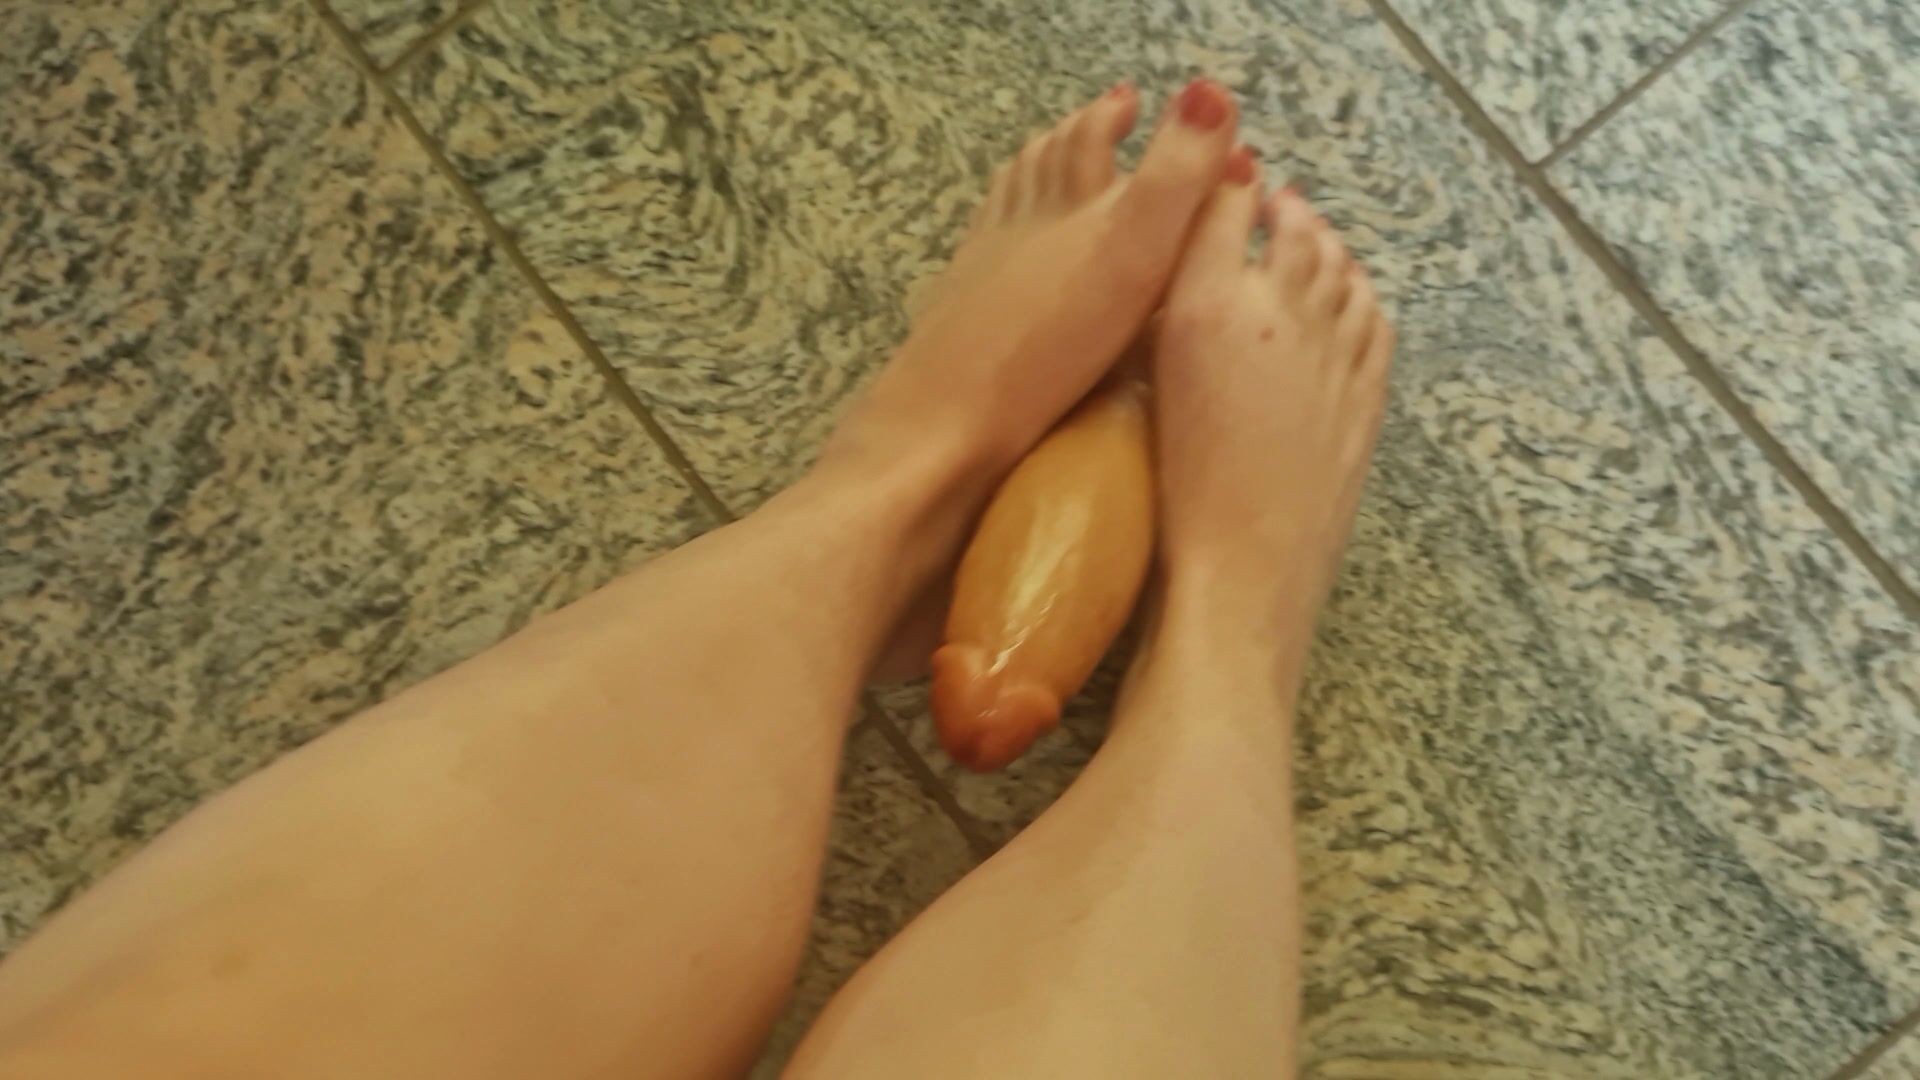 Feetporn with Countdown and Surprise♡